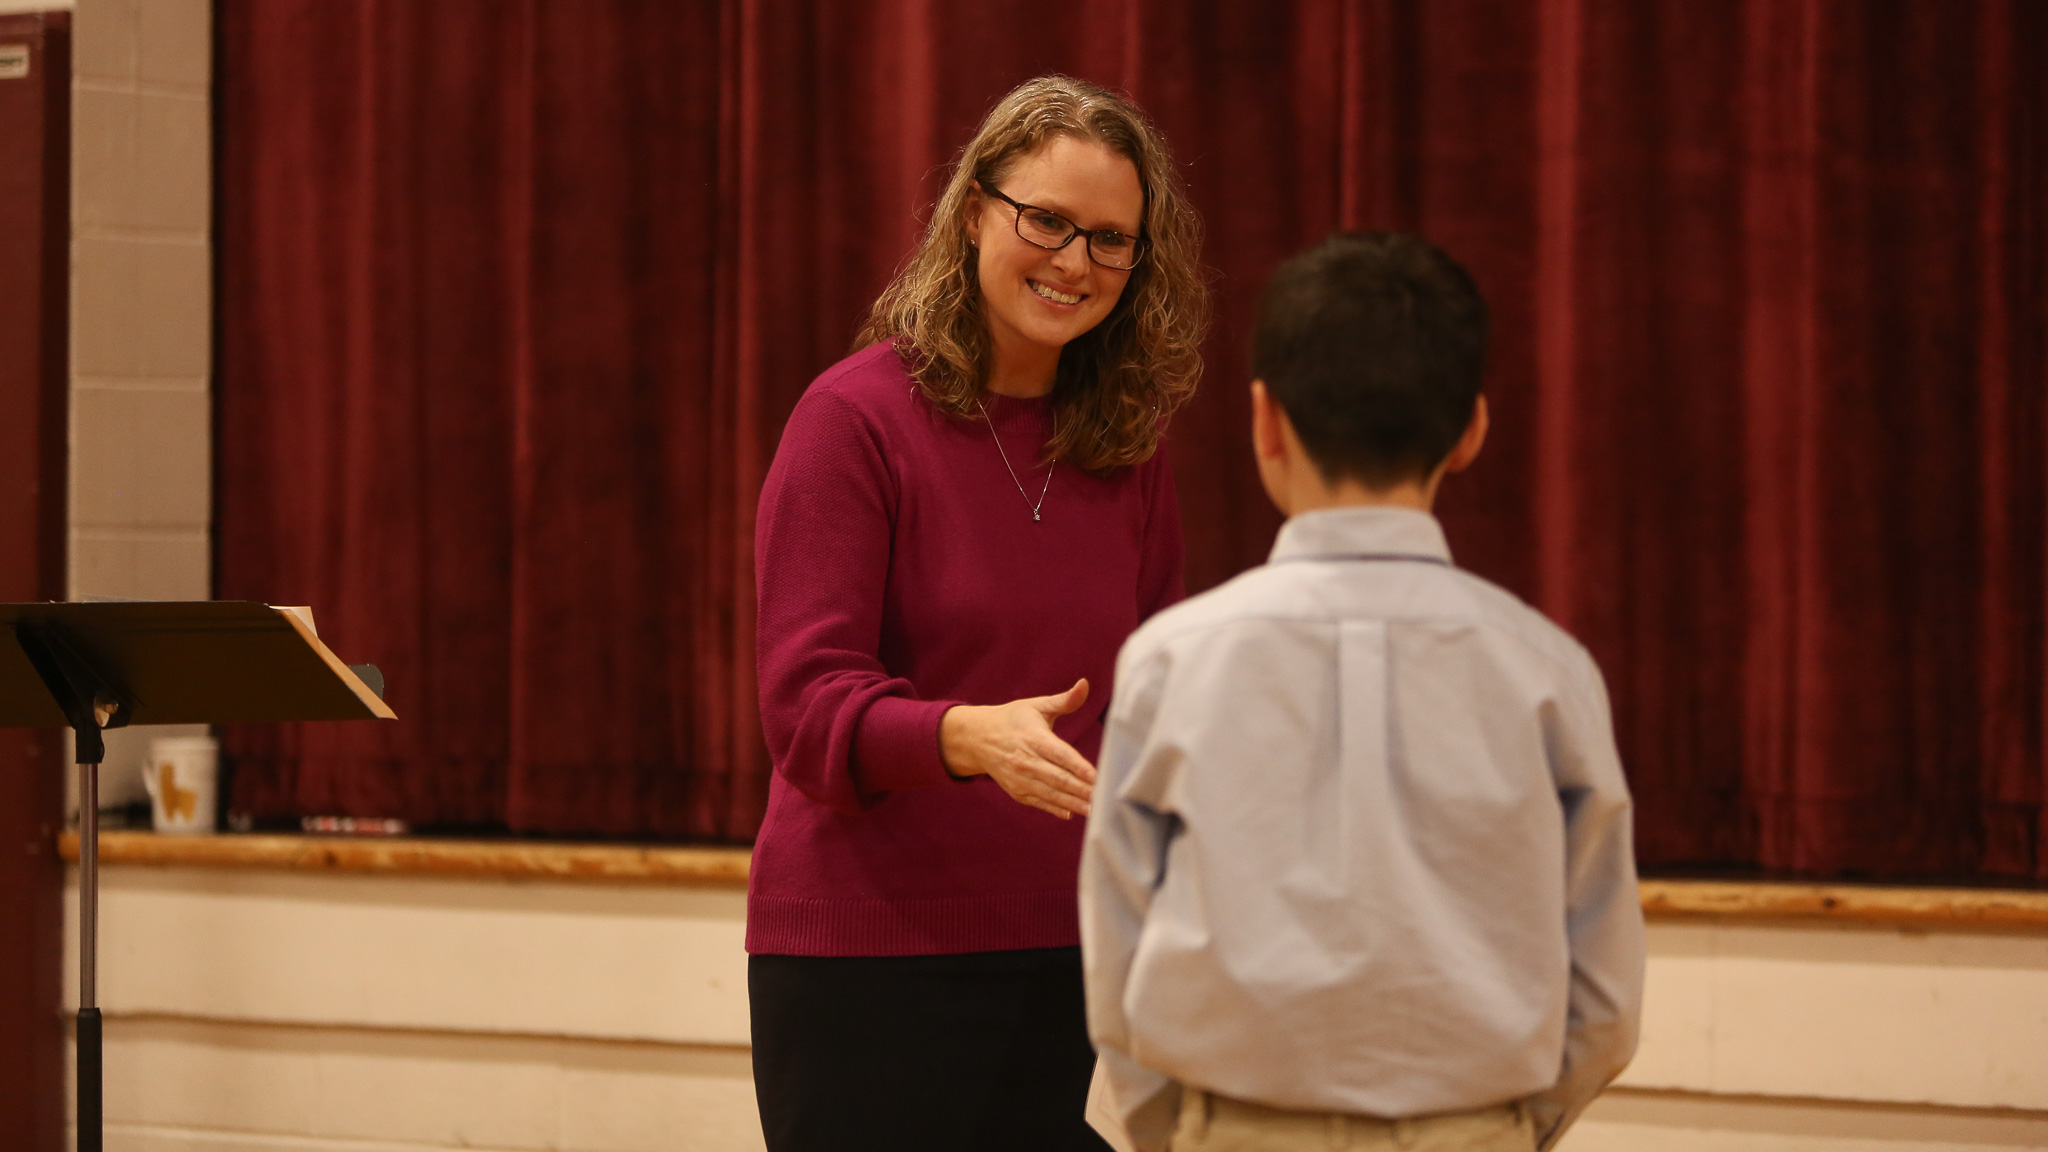 Teacher talks to her student during class presentations in the gymnasium